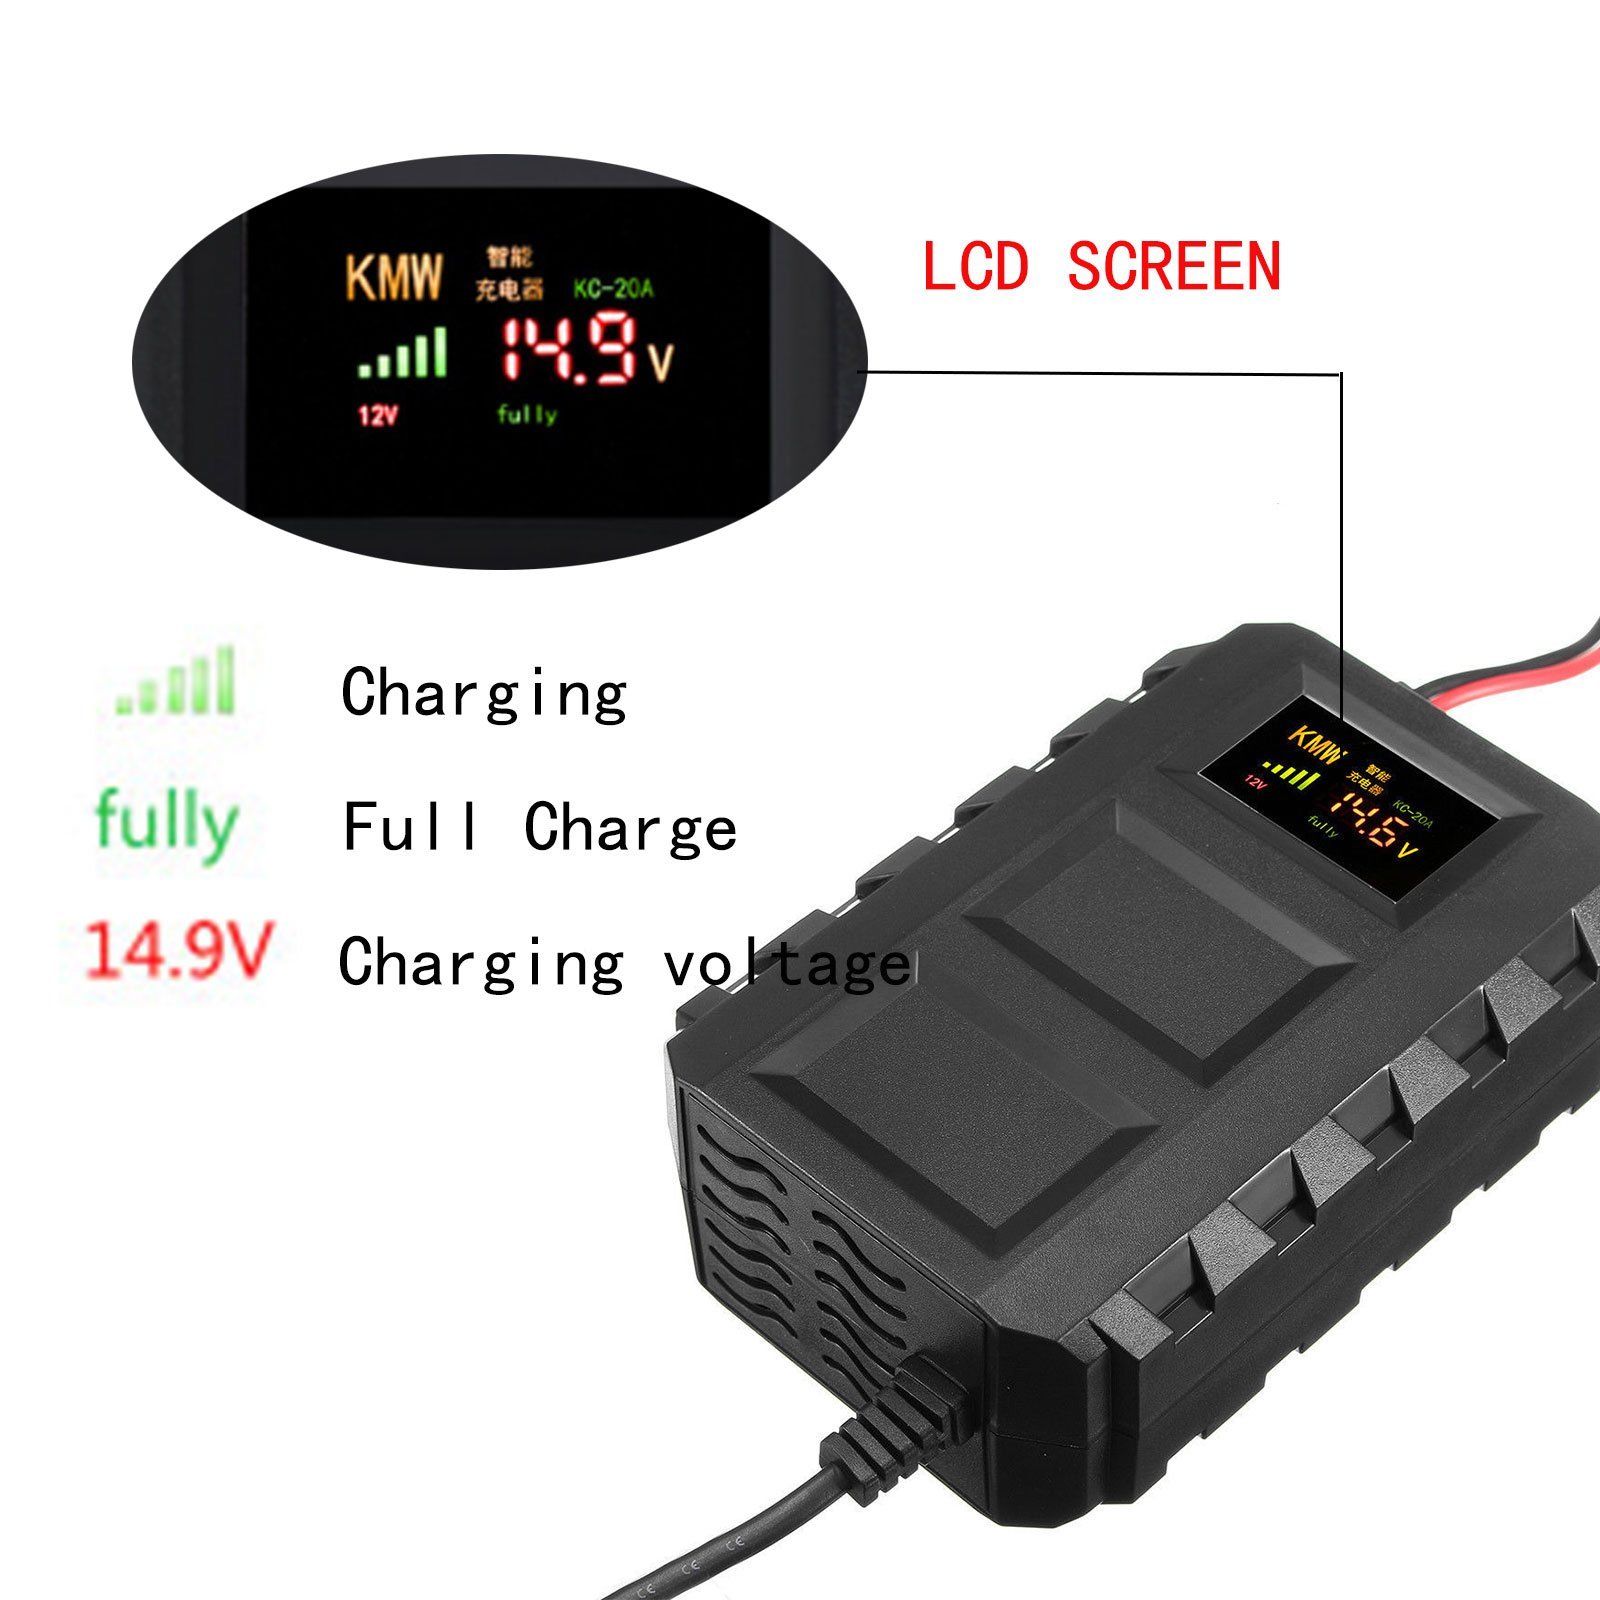 Car Battery Lead Acid Charger Automobile Motorcycle 12V 20A Intelligent LCD